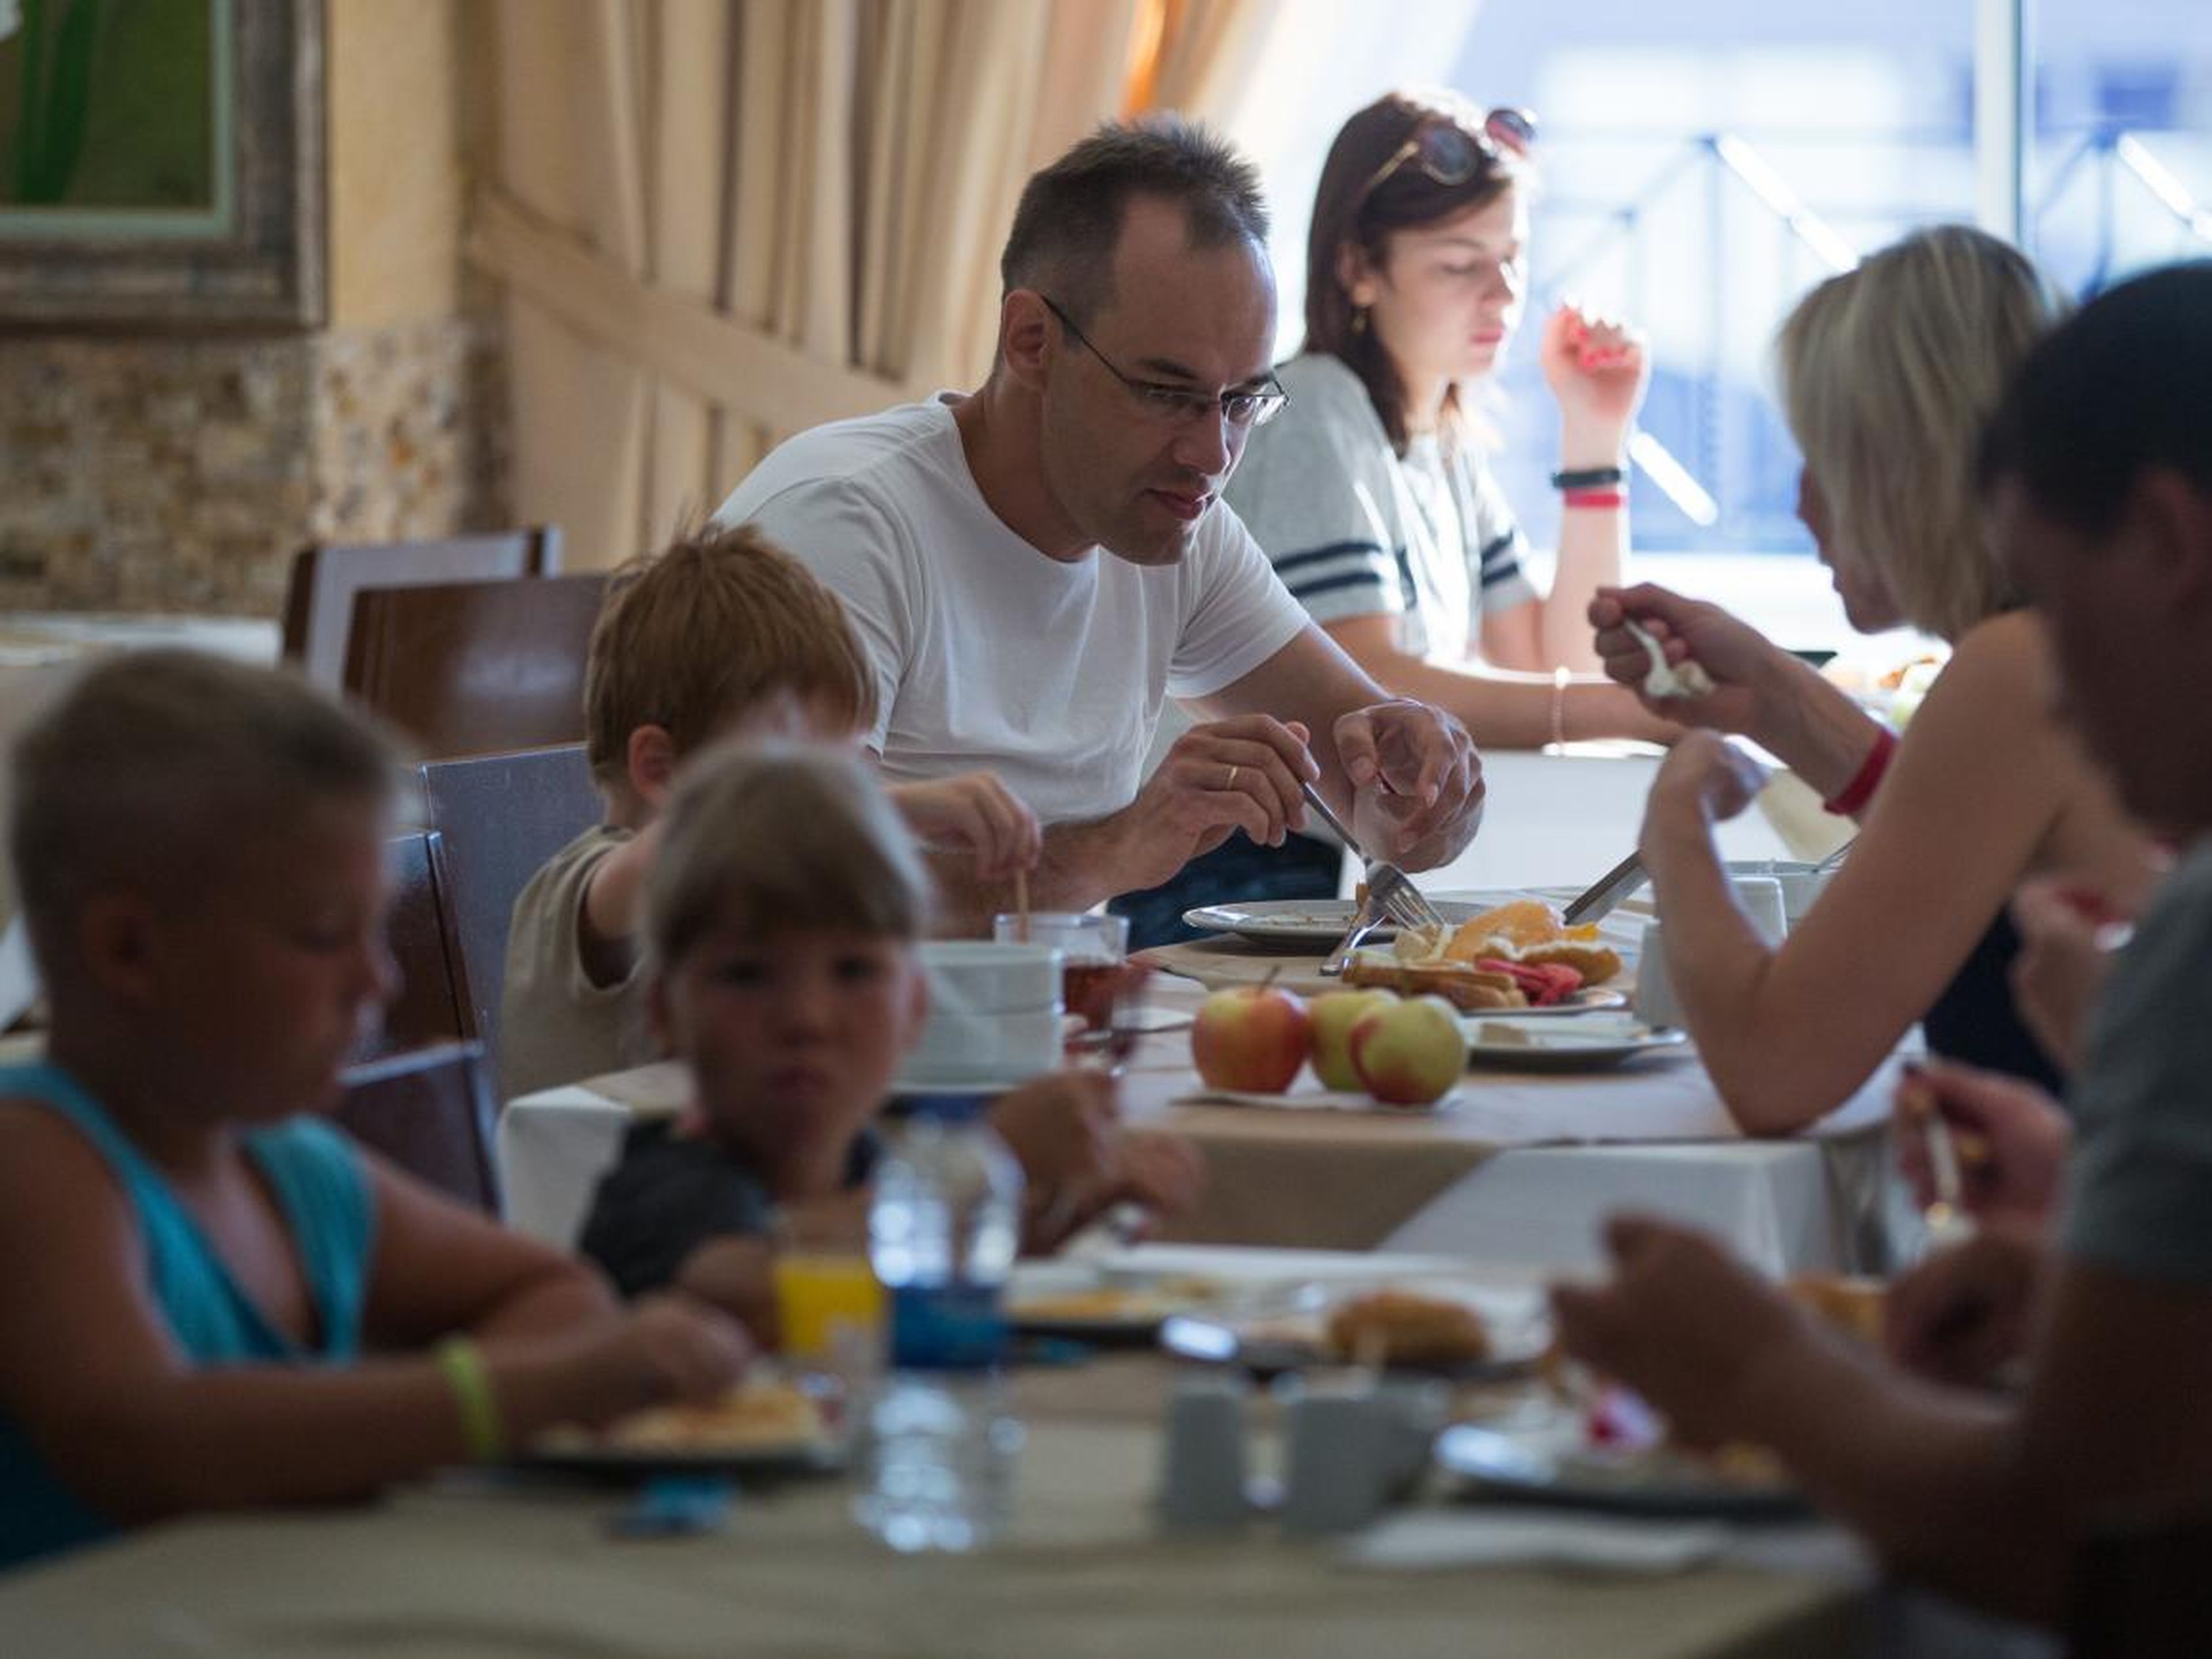 You may also have to wait in long lines before you can sit down and enjoy a meal with your family.